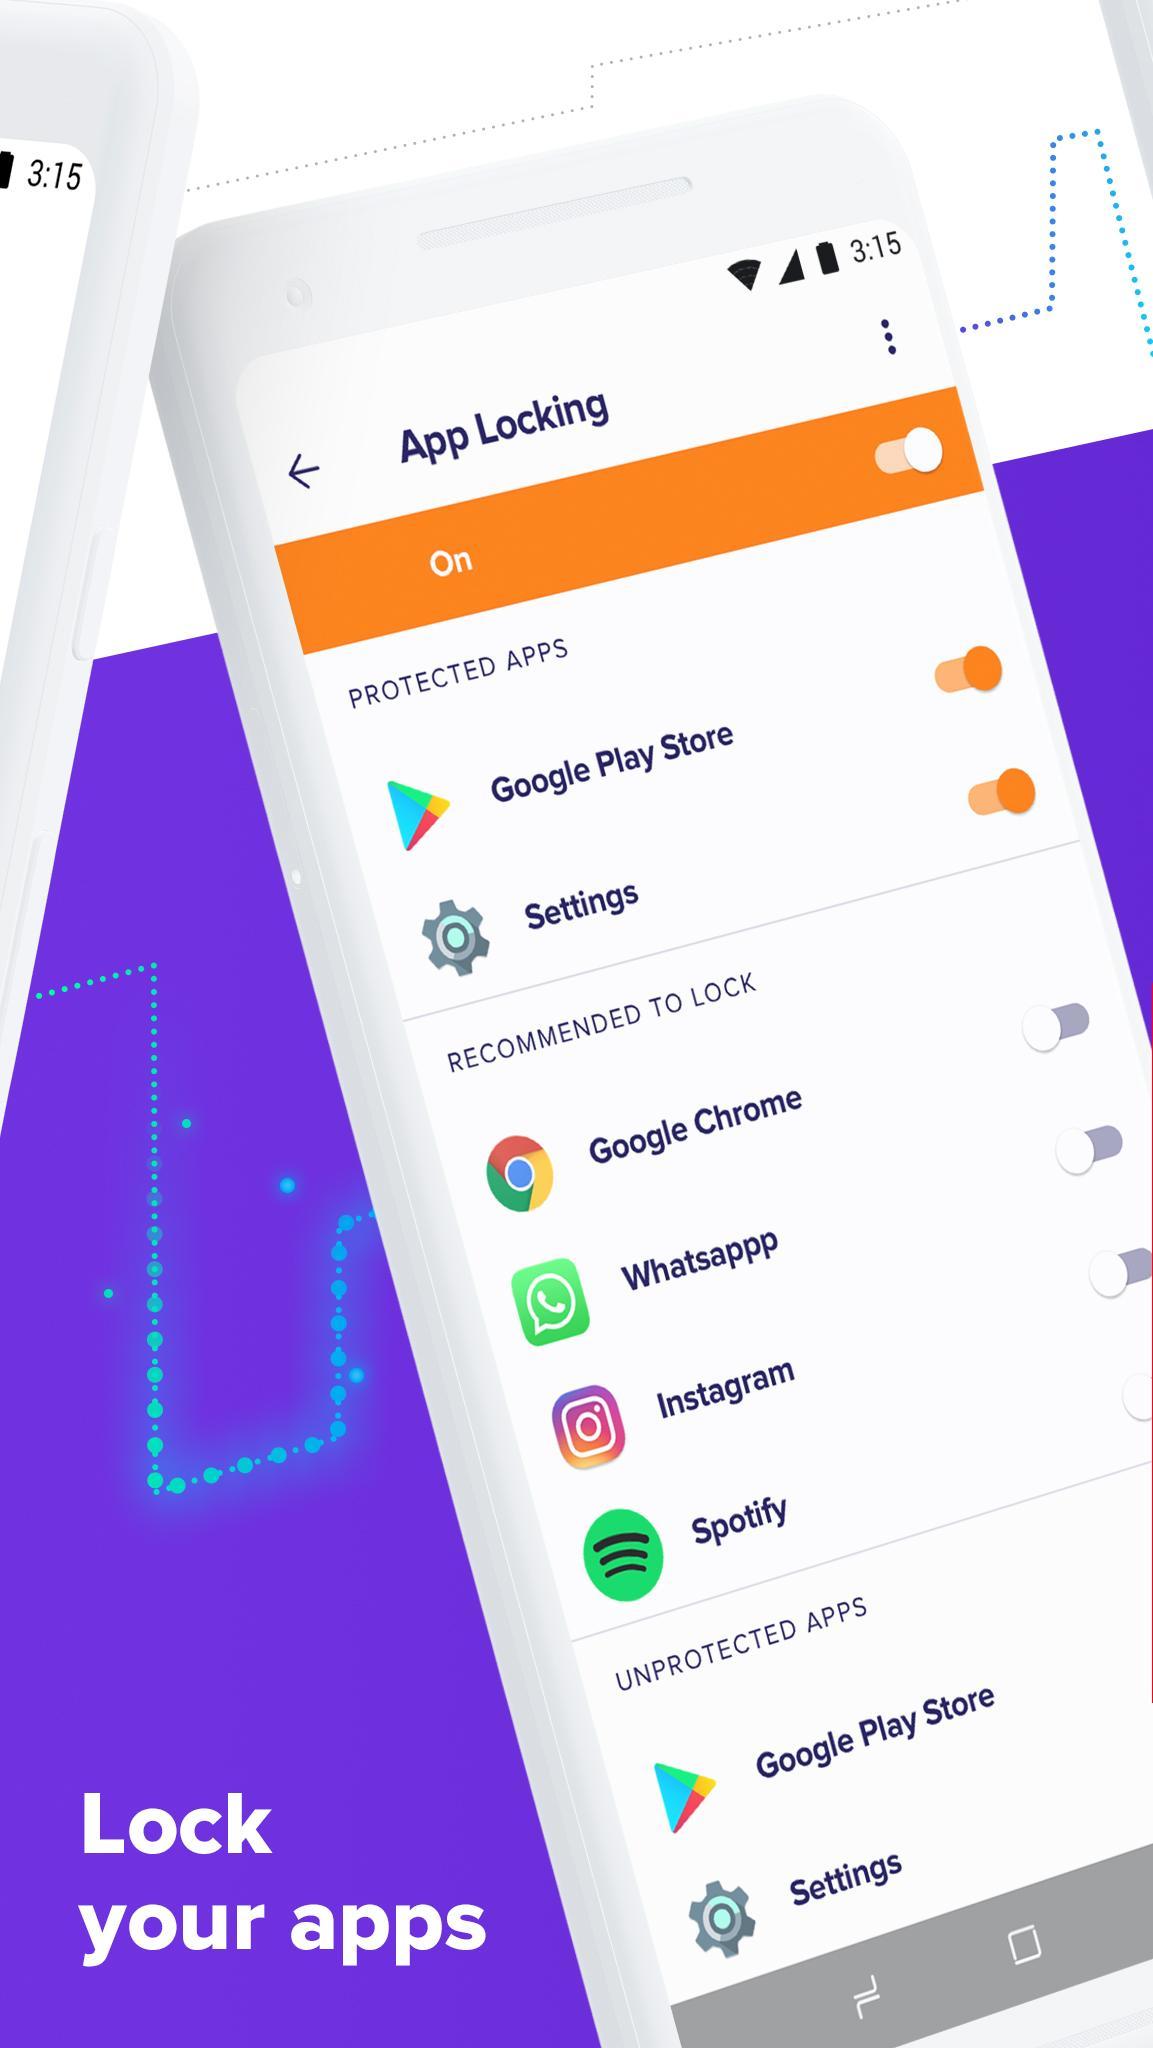 Avast Antivirus Scan And Remove Virus Cleaner For Android Apk Download